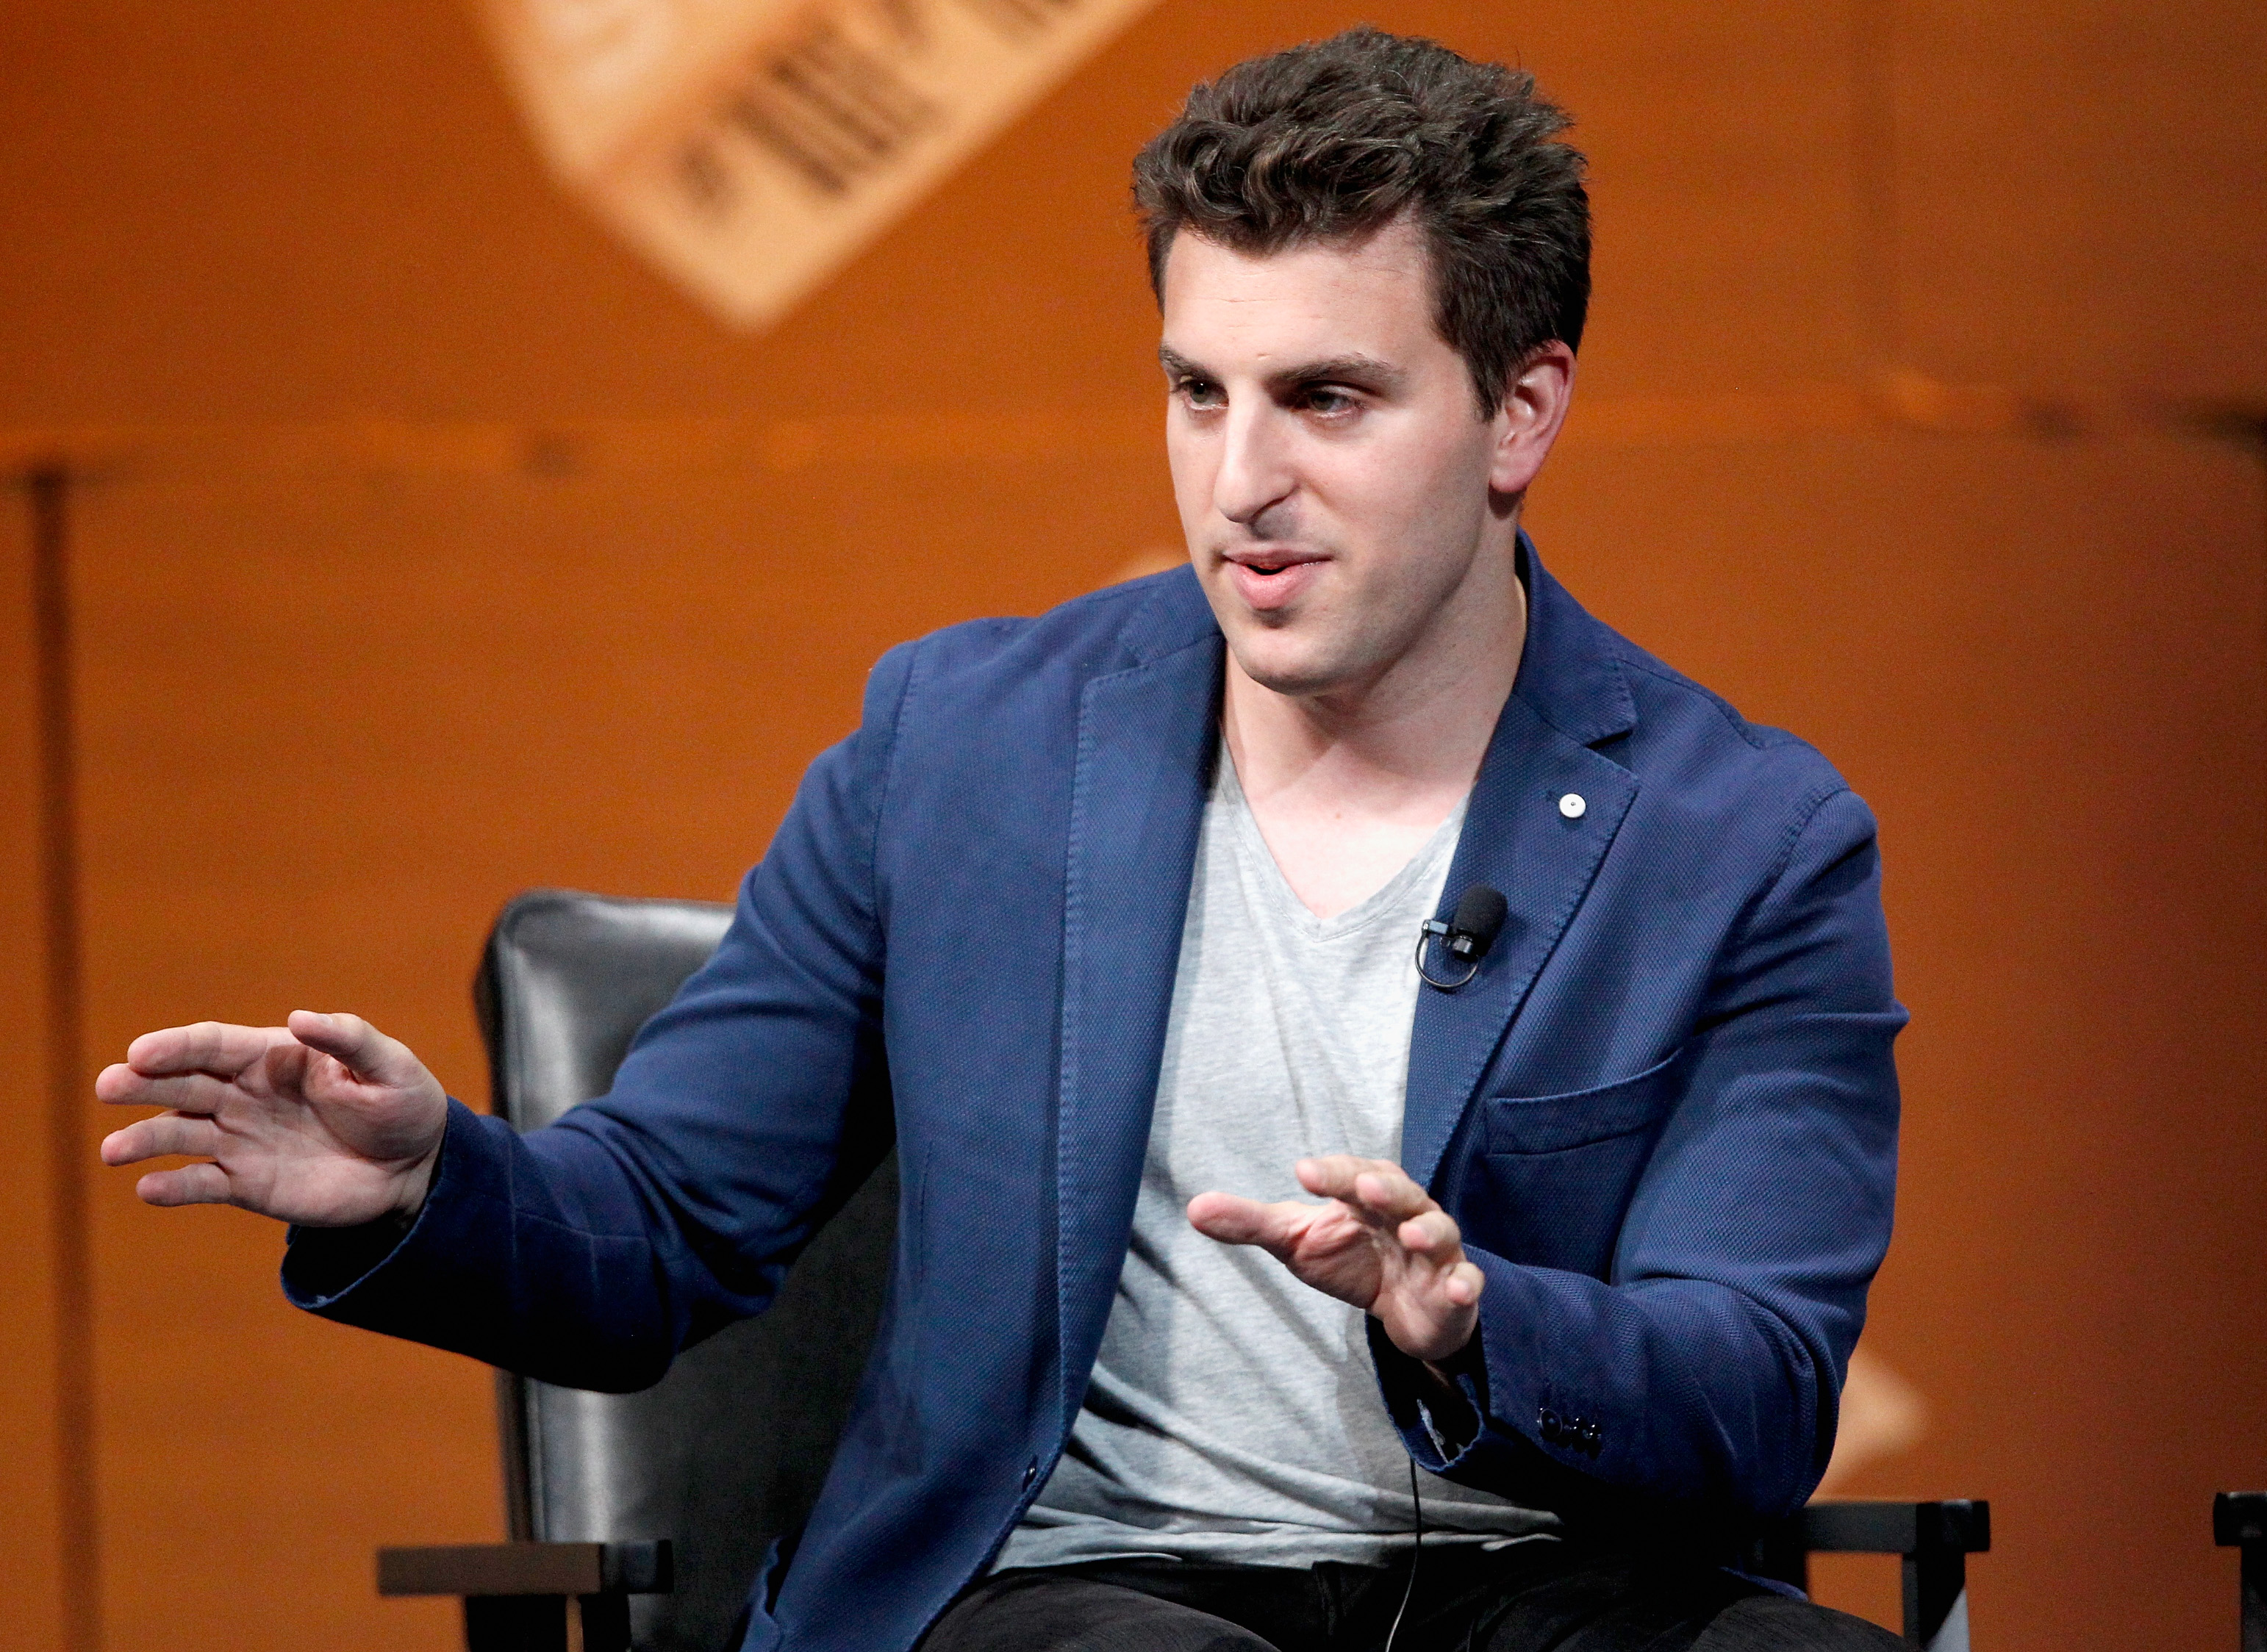 Airbnb Co-Founder and CEO Brian Chesky speaks onstage during "Generation Next" at the Vanity Fair New Establishment Summit at Yerba Buena Center for the Arts on October 9, 2014 in San Francisco, California. (Kimberly White&mdash;Getty Images for Vanity Fair)